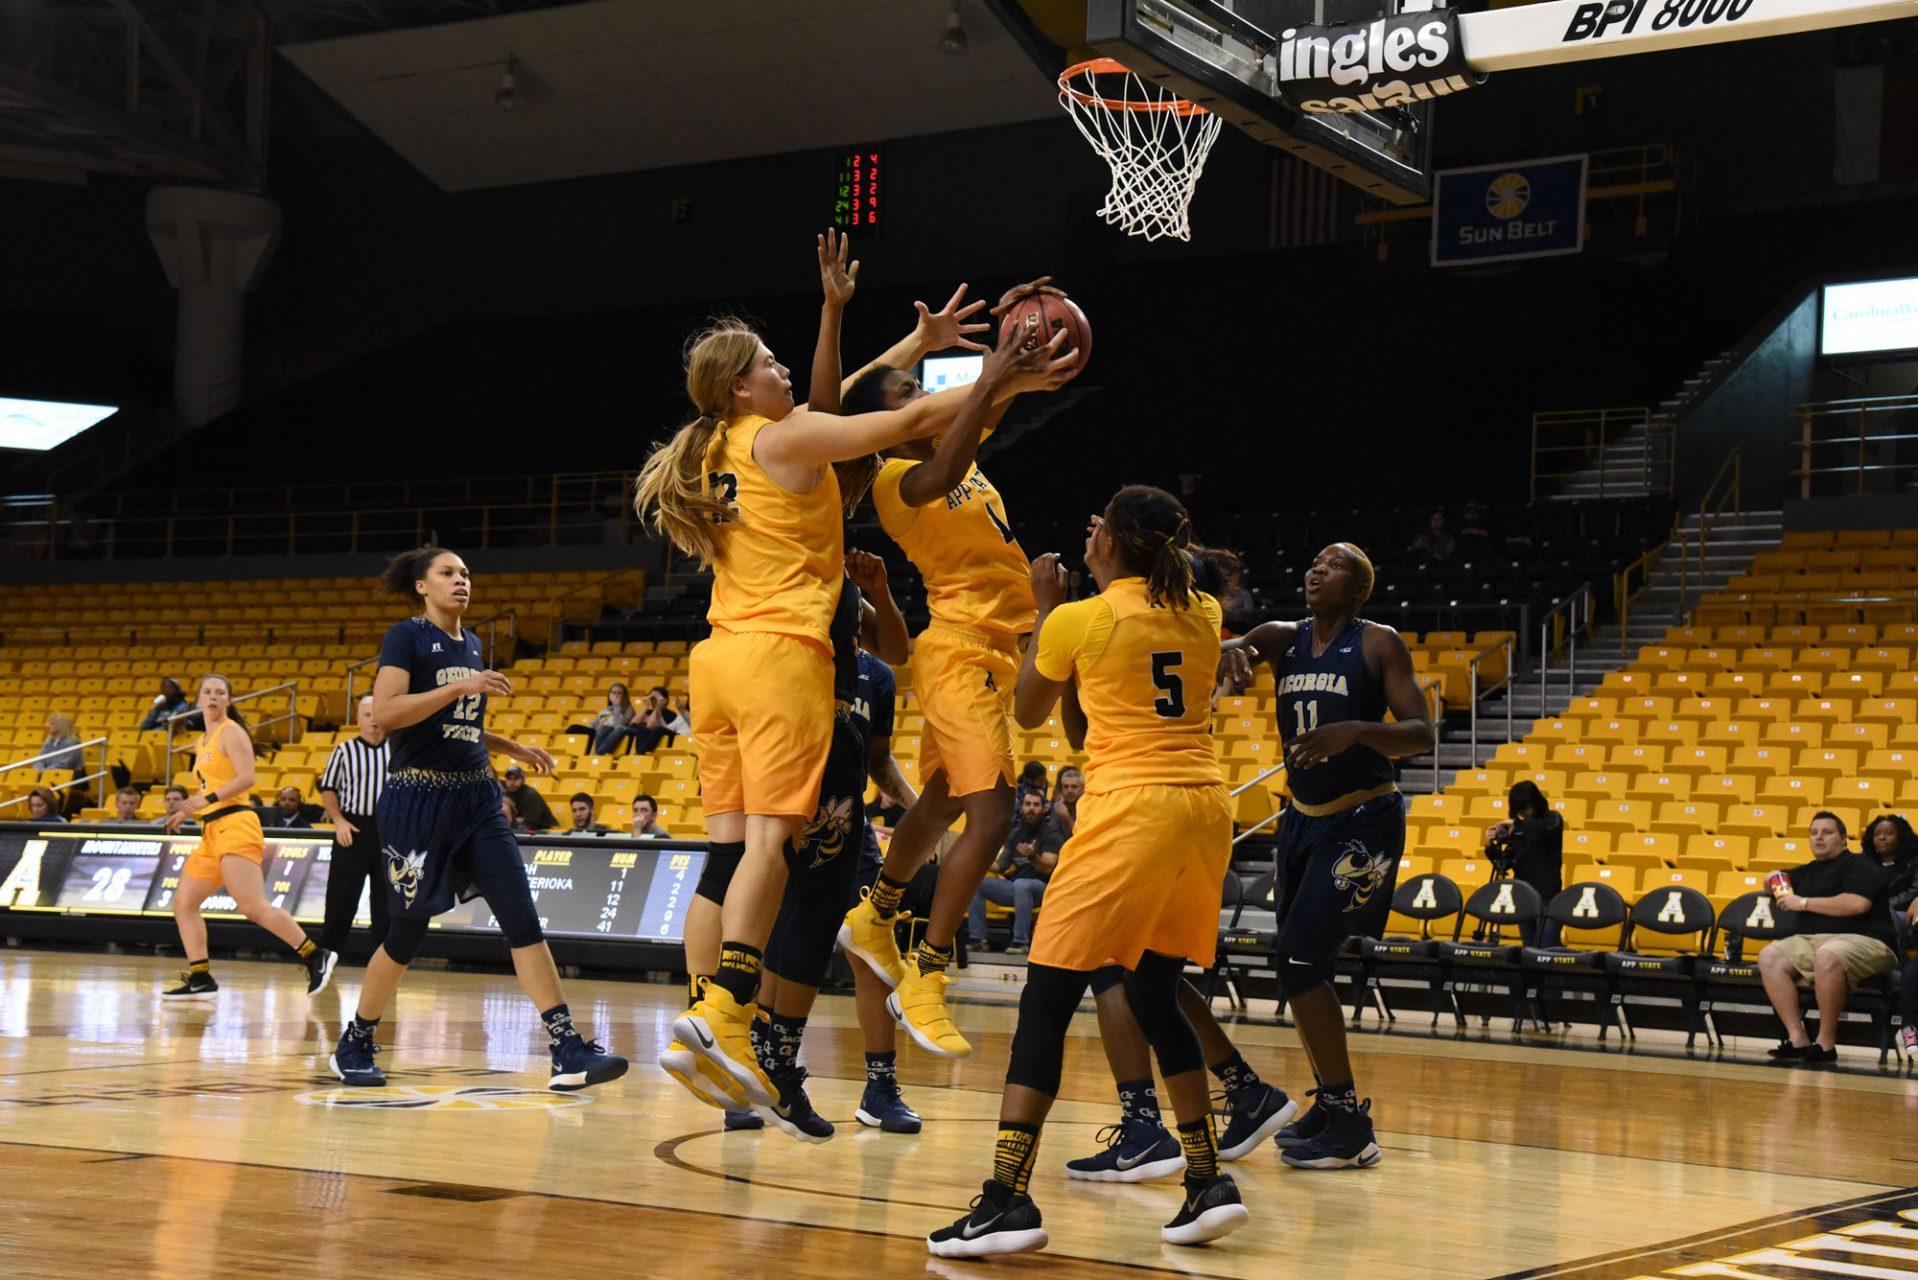 Sophomore center  Bayley Plummer and freshman Maya Calder both jump up to score during the game against Georgia Tech.  